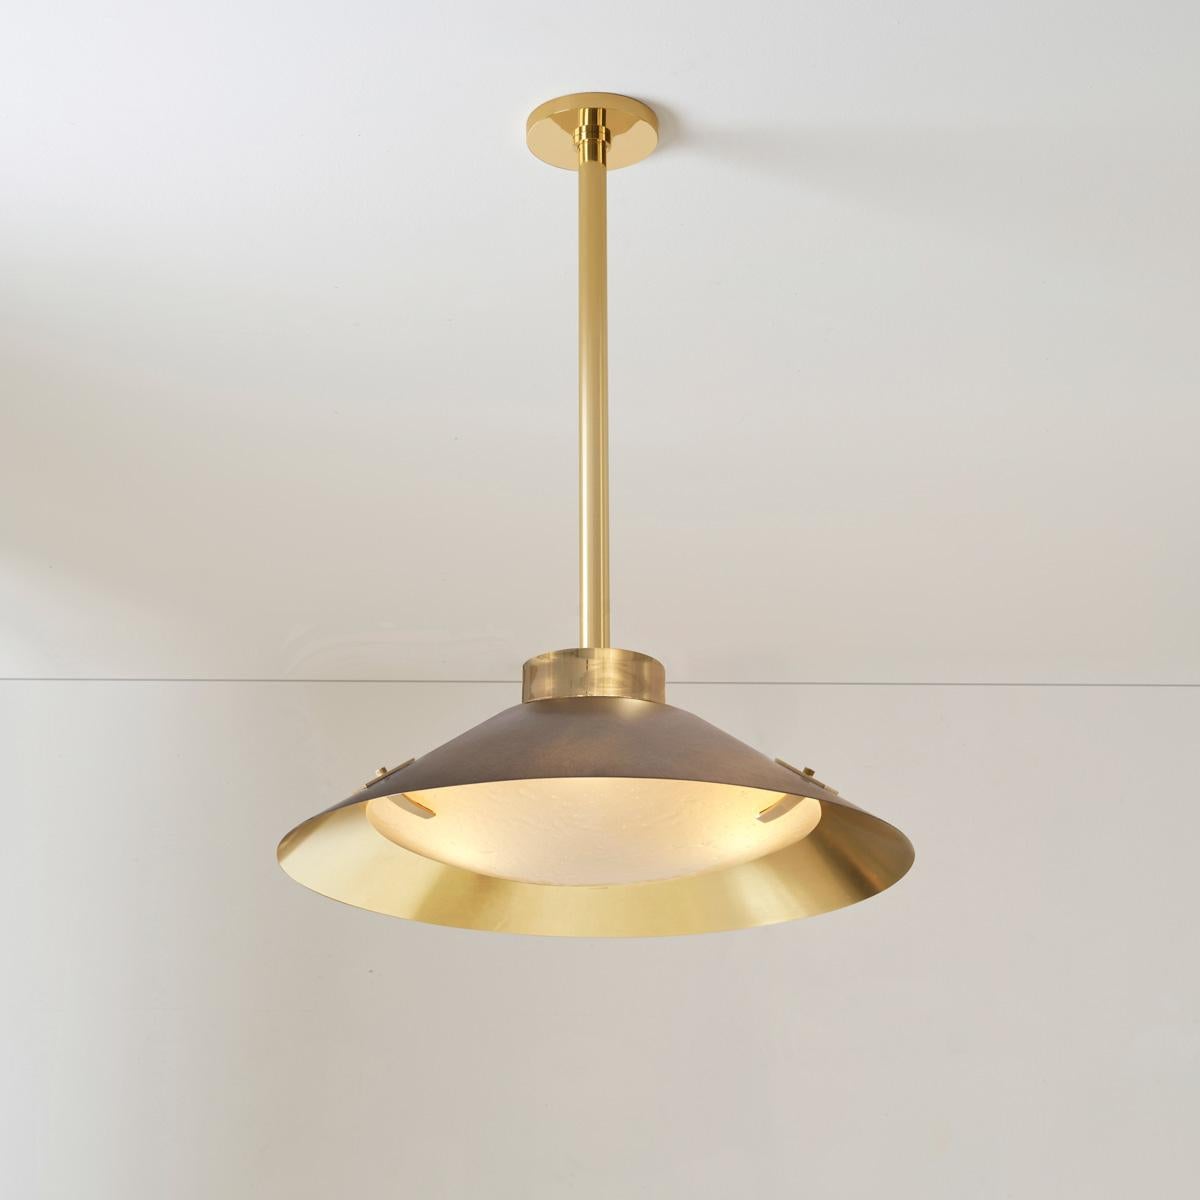 Kono Pendant by Gaspare Asaro. Satin Brass and Sand White For Sale 2